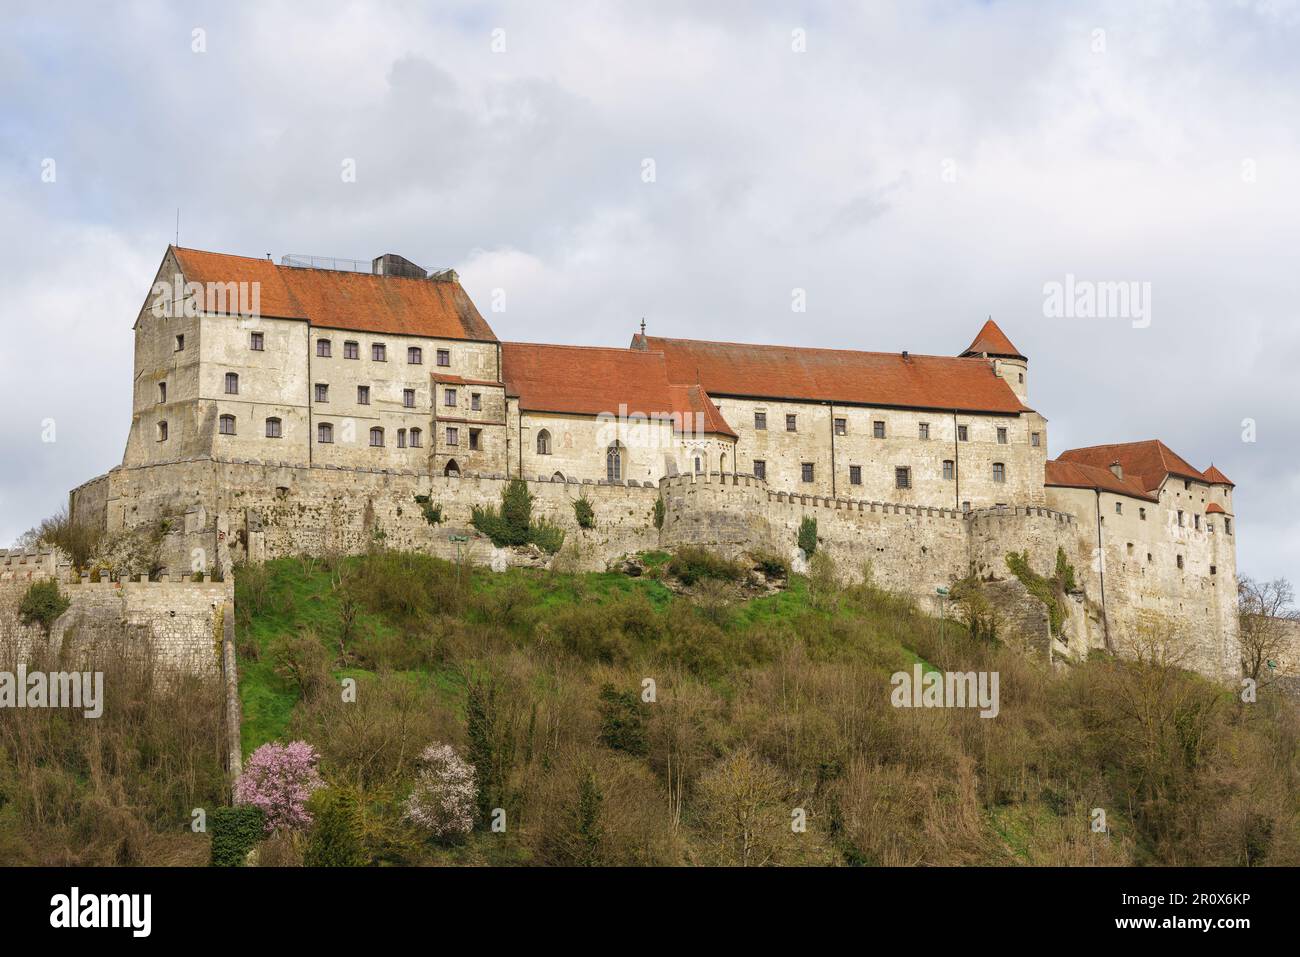 Burghausen in the Altötting district of Upper Bavaria in Germany. Panorama of Burghausen Castle. Medieval gothic castle above town. Stock Photo